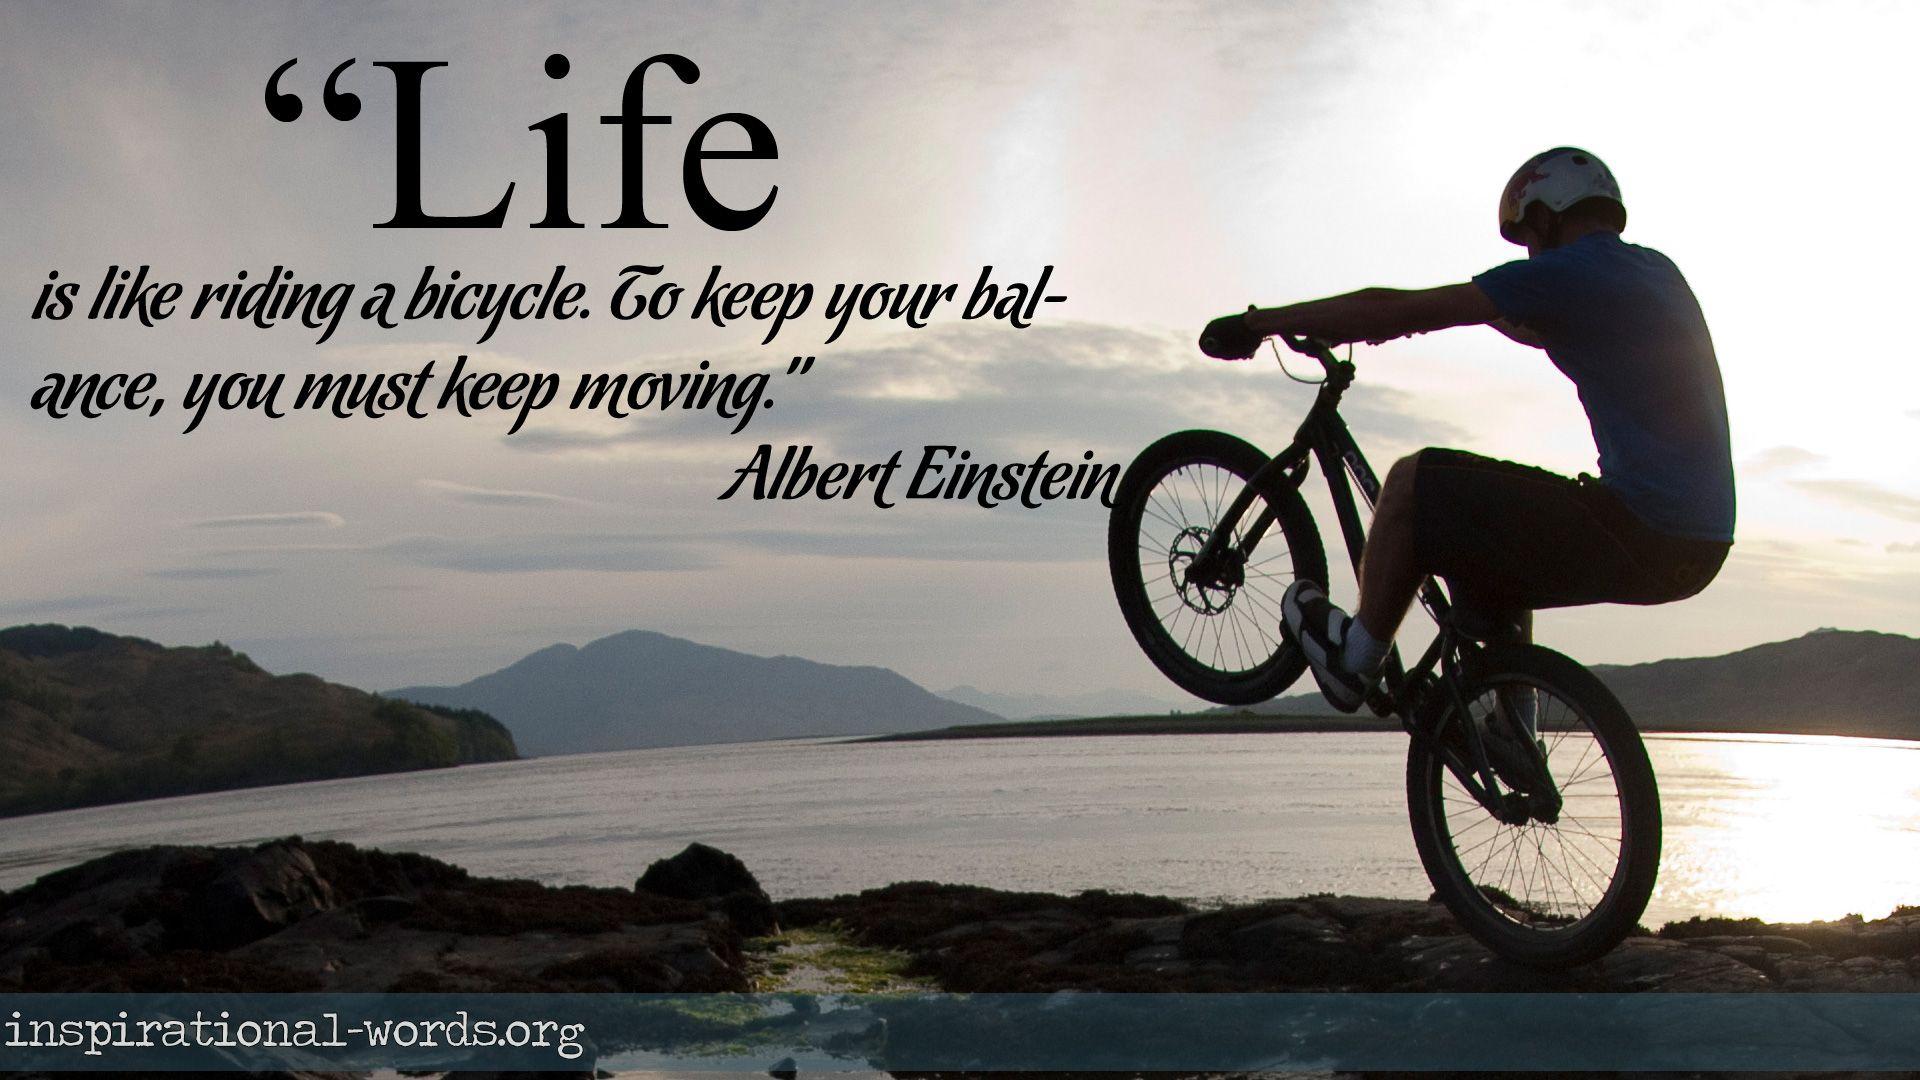 Inspirational Wallpaper Quote by Albert Einstein “Life is like riding a bicycle. To keep your. Funny quotes for instagram, Motorcycle quotes funny, Bicycle quotes